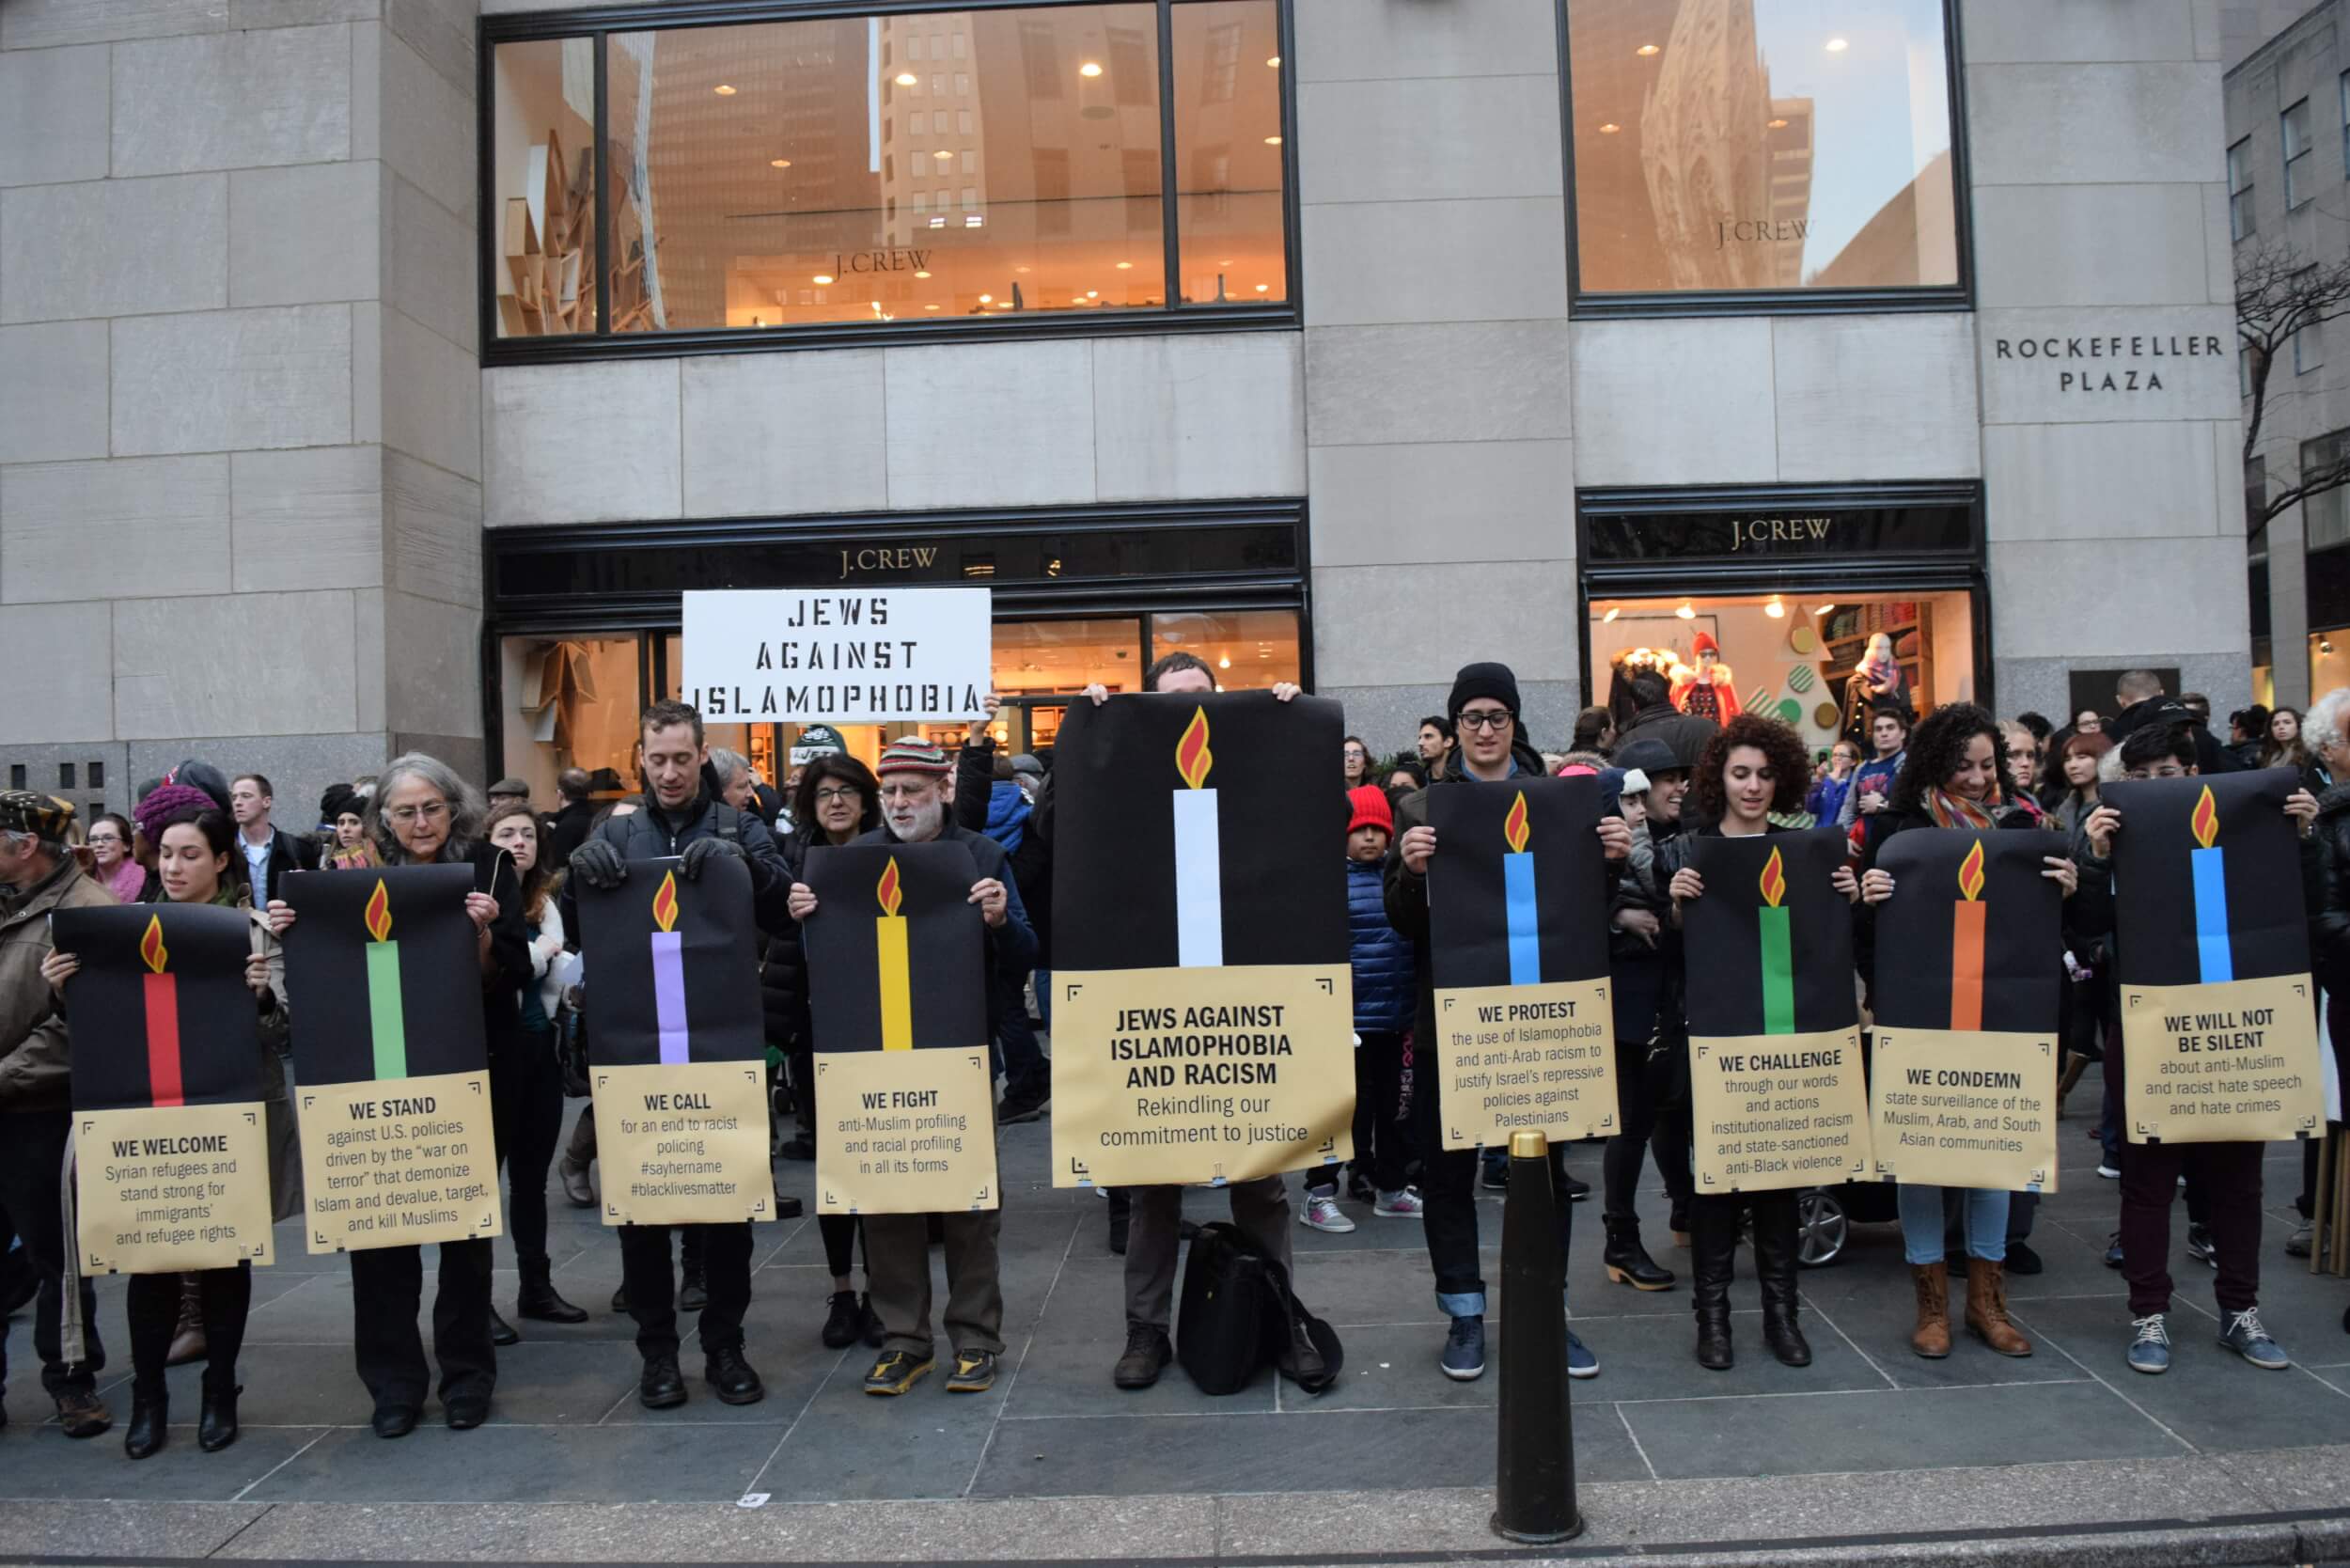 Activists speaking out against Islamophobia and racism in Rockefeller Plaza, Dec 6. (Photo: Jewish Voice for Peace)